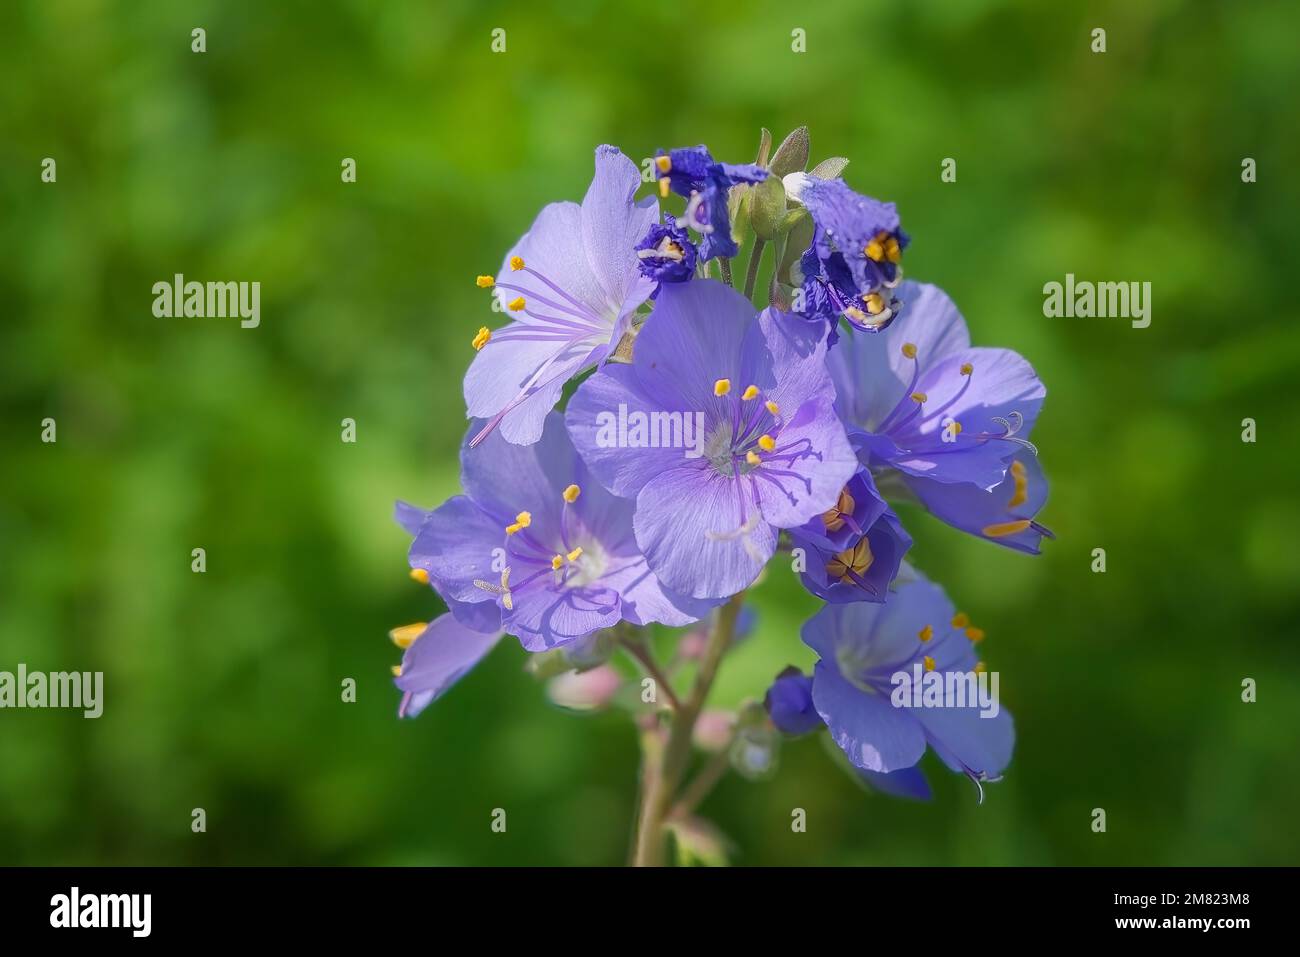 Close up of a polemonium caeruleum flower in bloom with a green background. Stock Photo